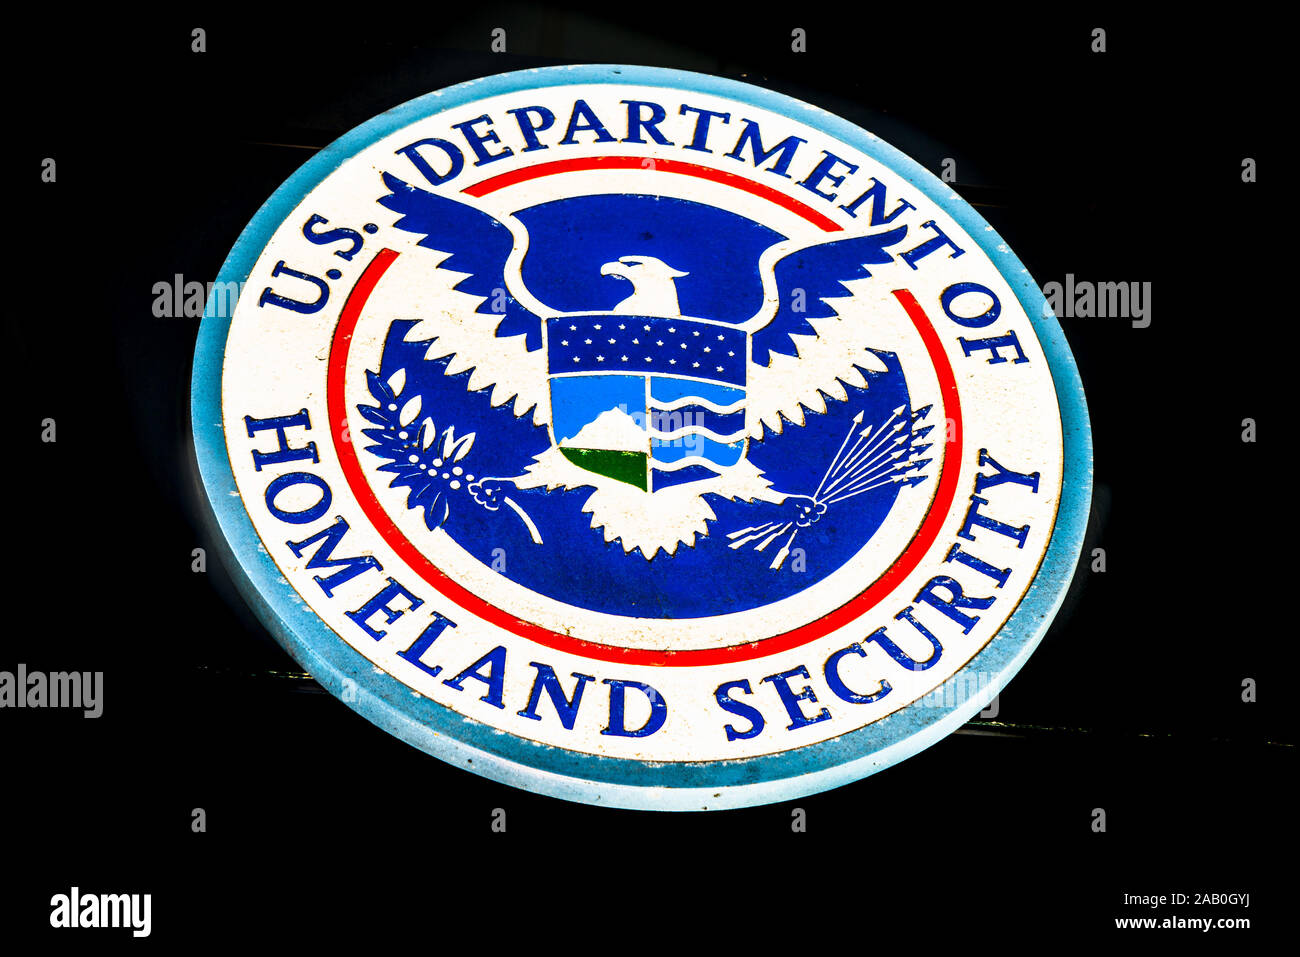 Nov 17, 2019 San Francisco / CA / USA - U.S. Department of Homeland Security Seal located at one of their buildings in downtown San Francisco Stock Photo